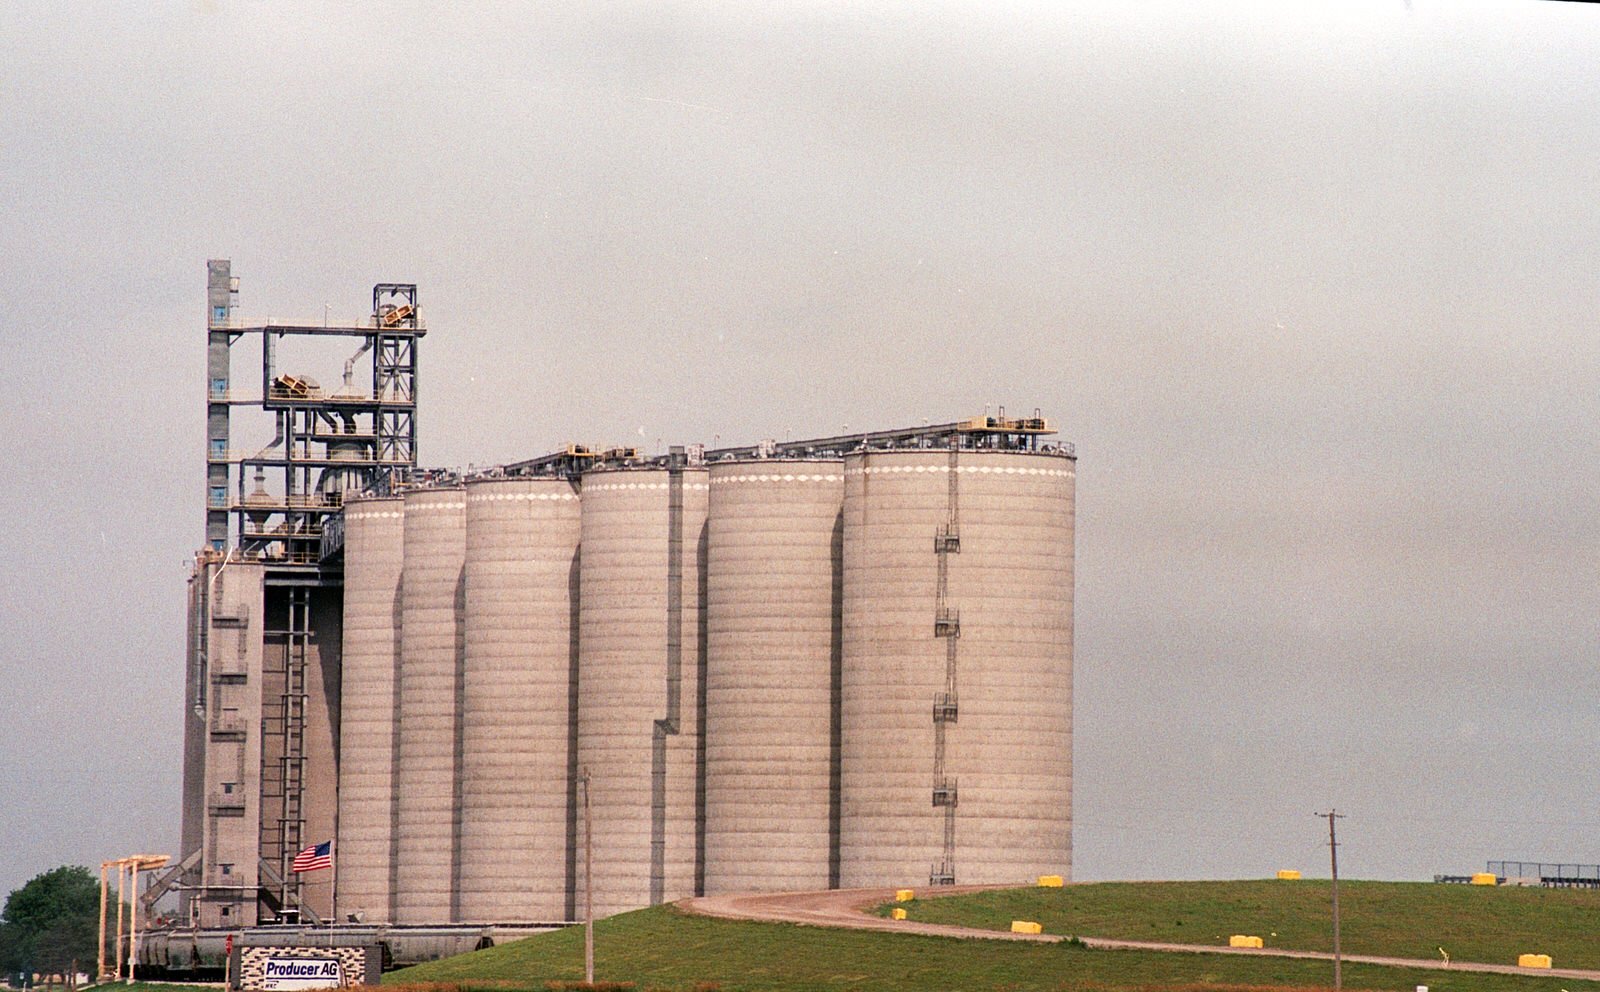 There were these HUGE silos that had access for trains to pull up next to them to load.